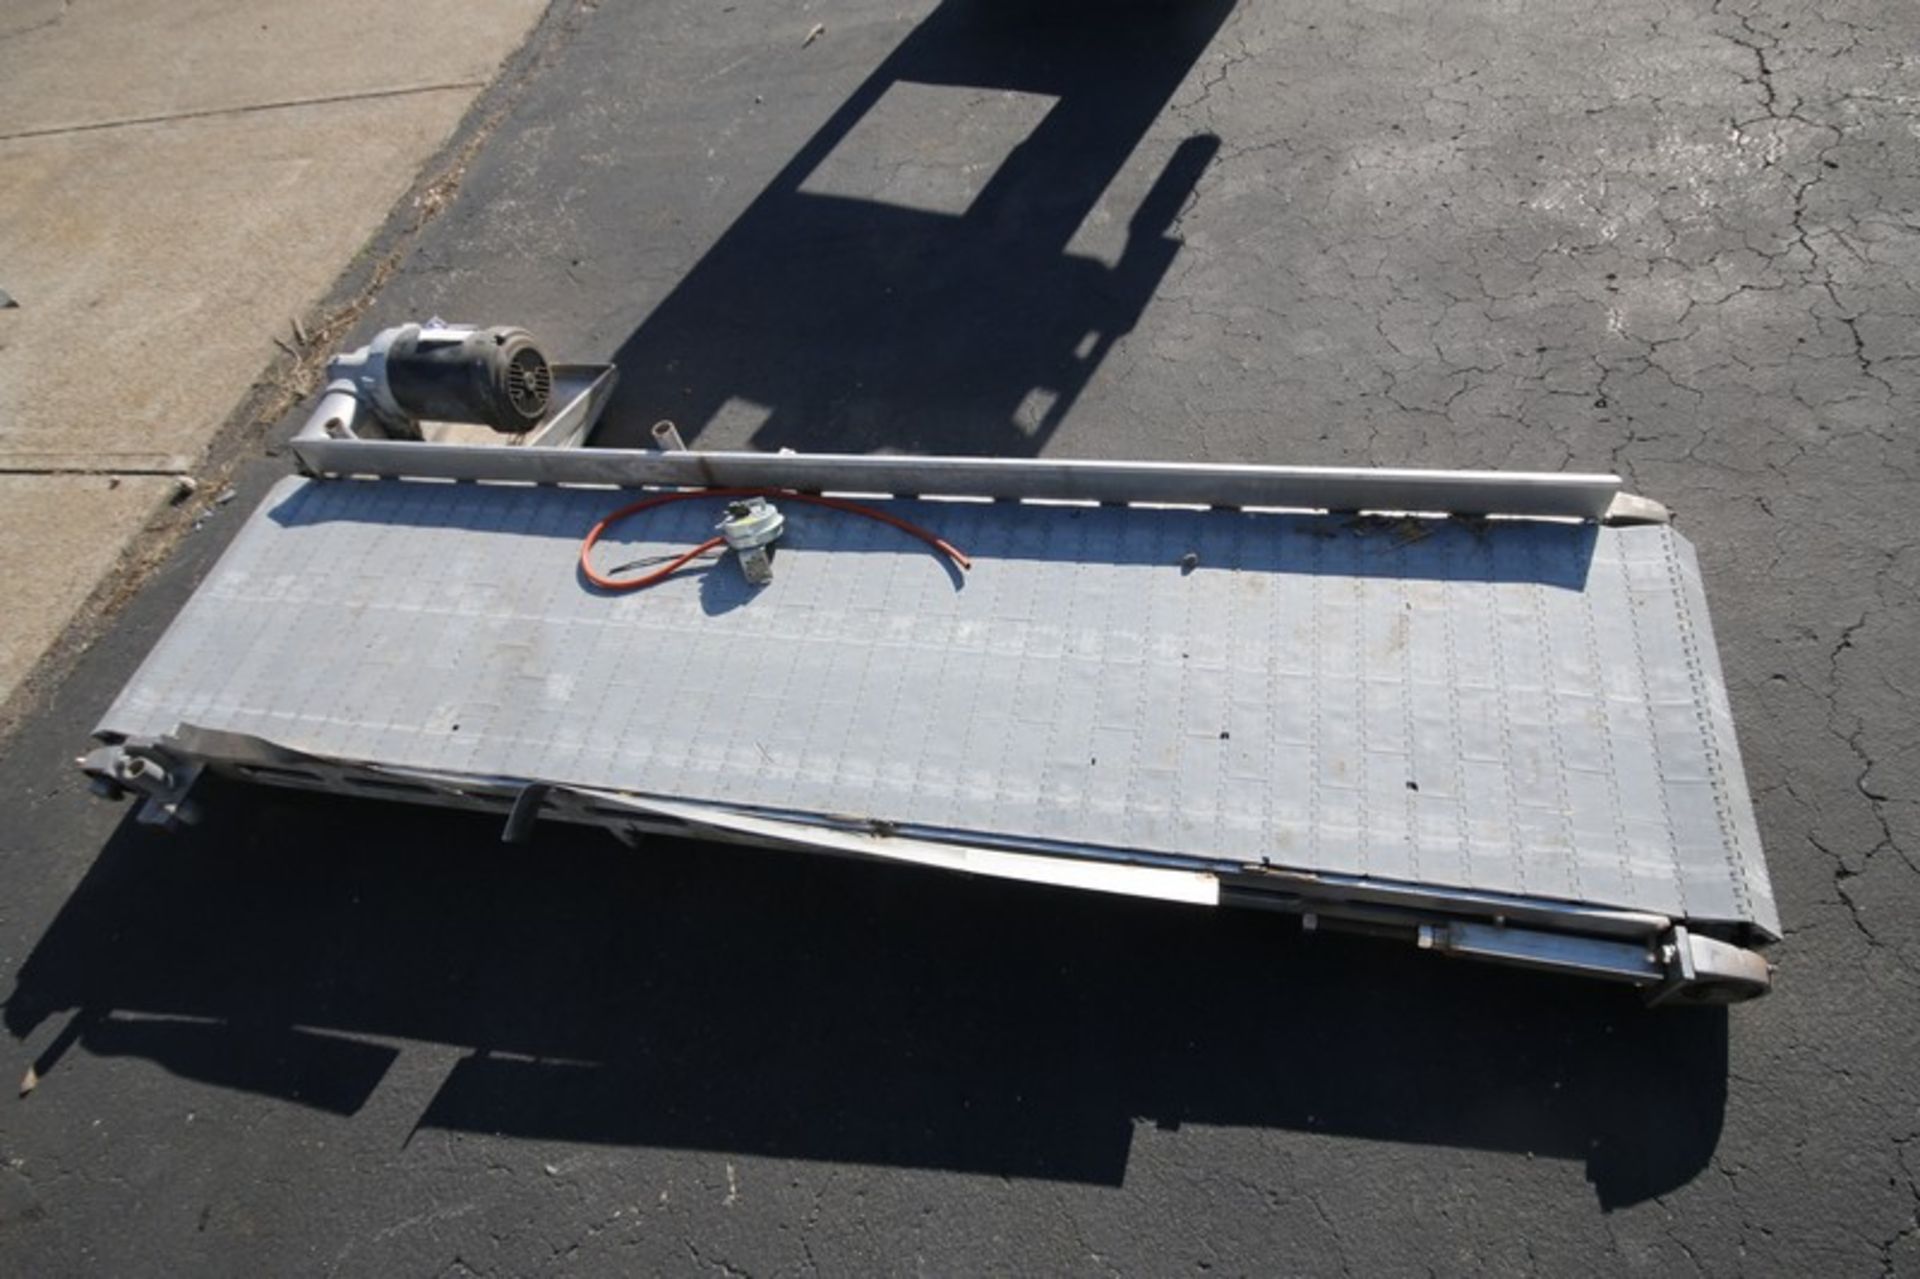 7' L S/S Power Belt Conveyor Section with 20" W Rex Type Plastic Belt, 1 hp / 1755 rpm Drive - Image 3 of 3